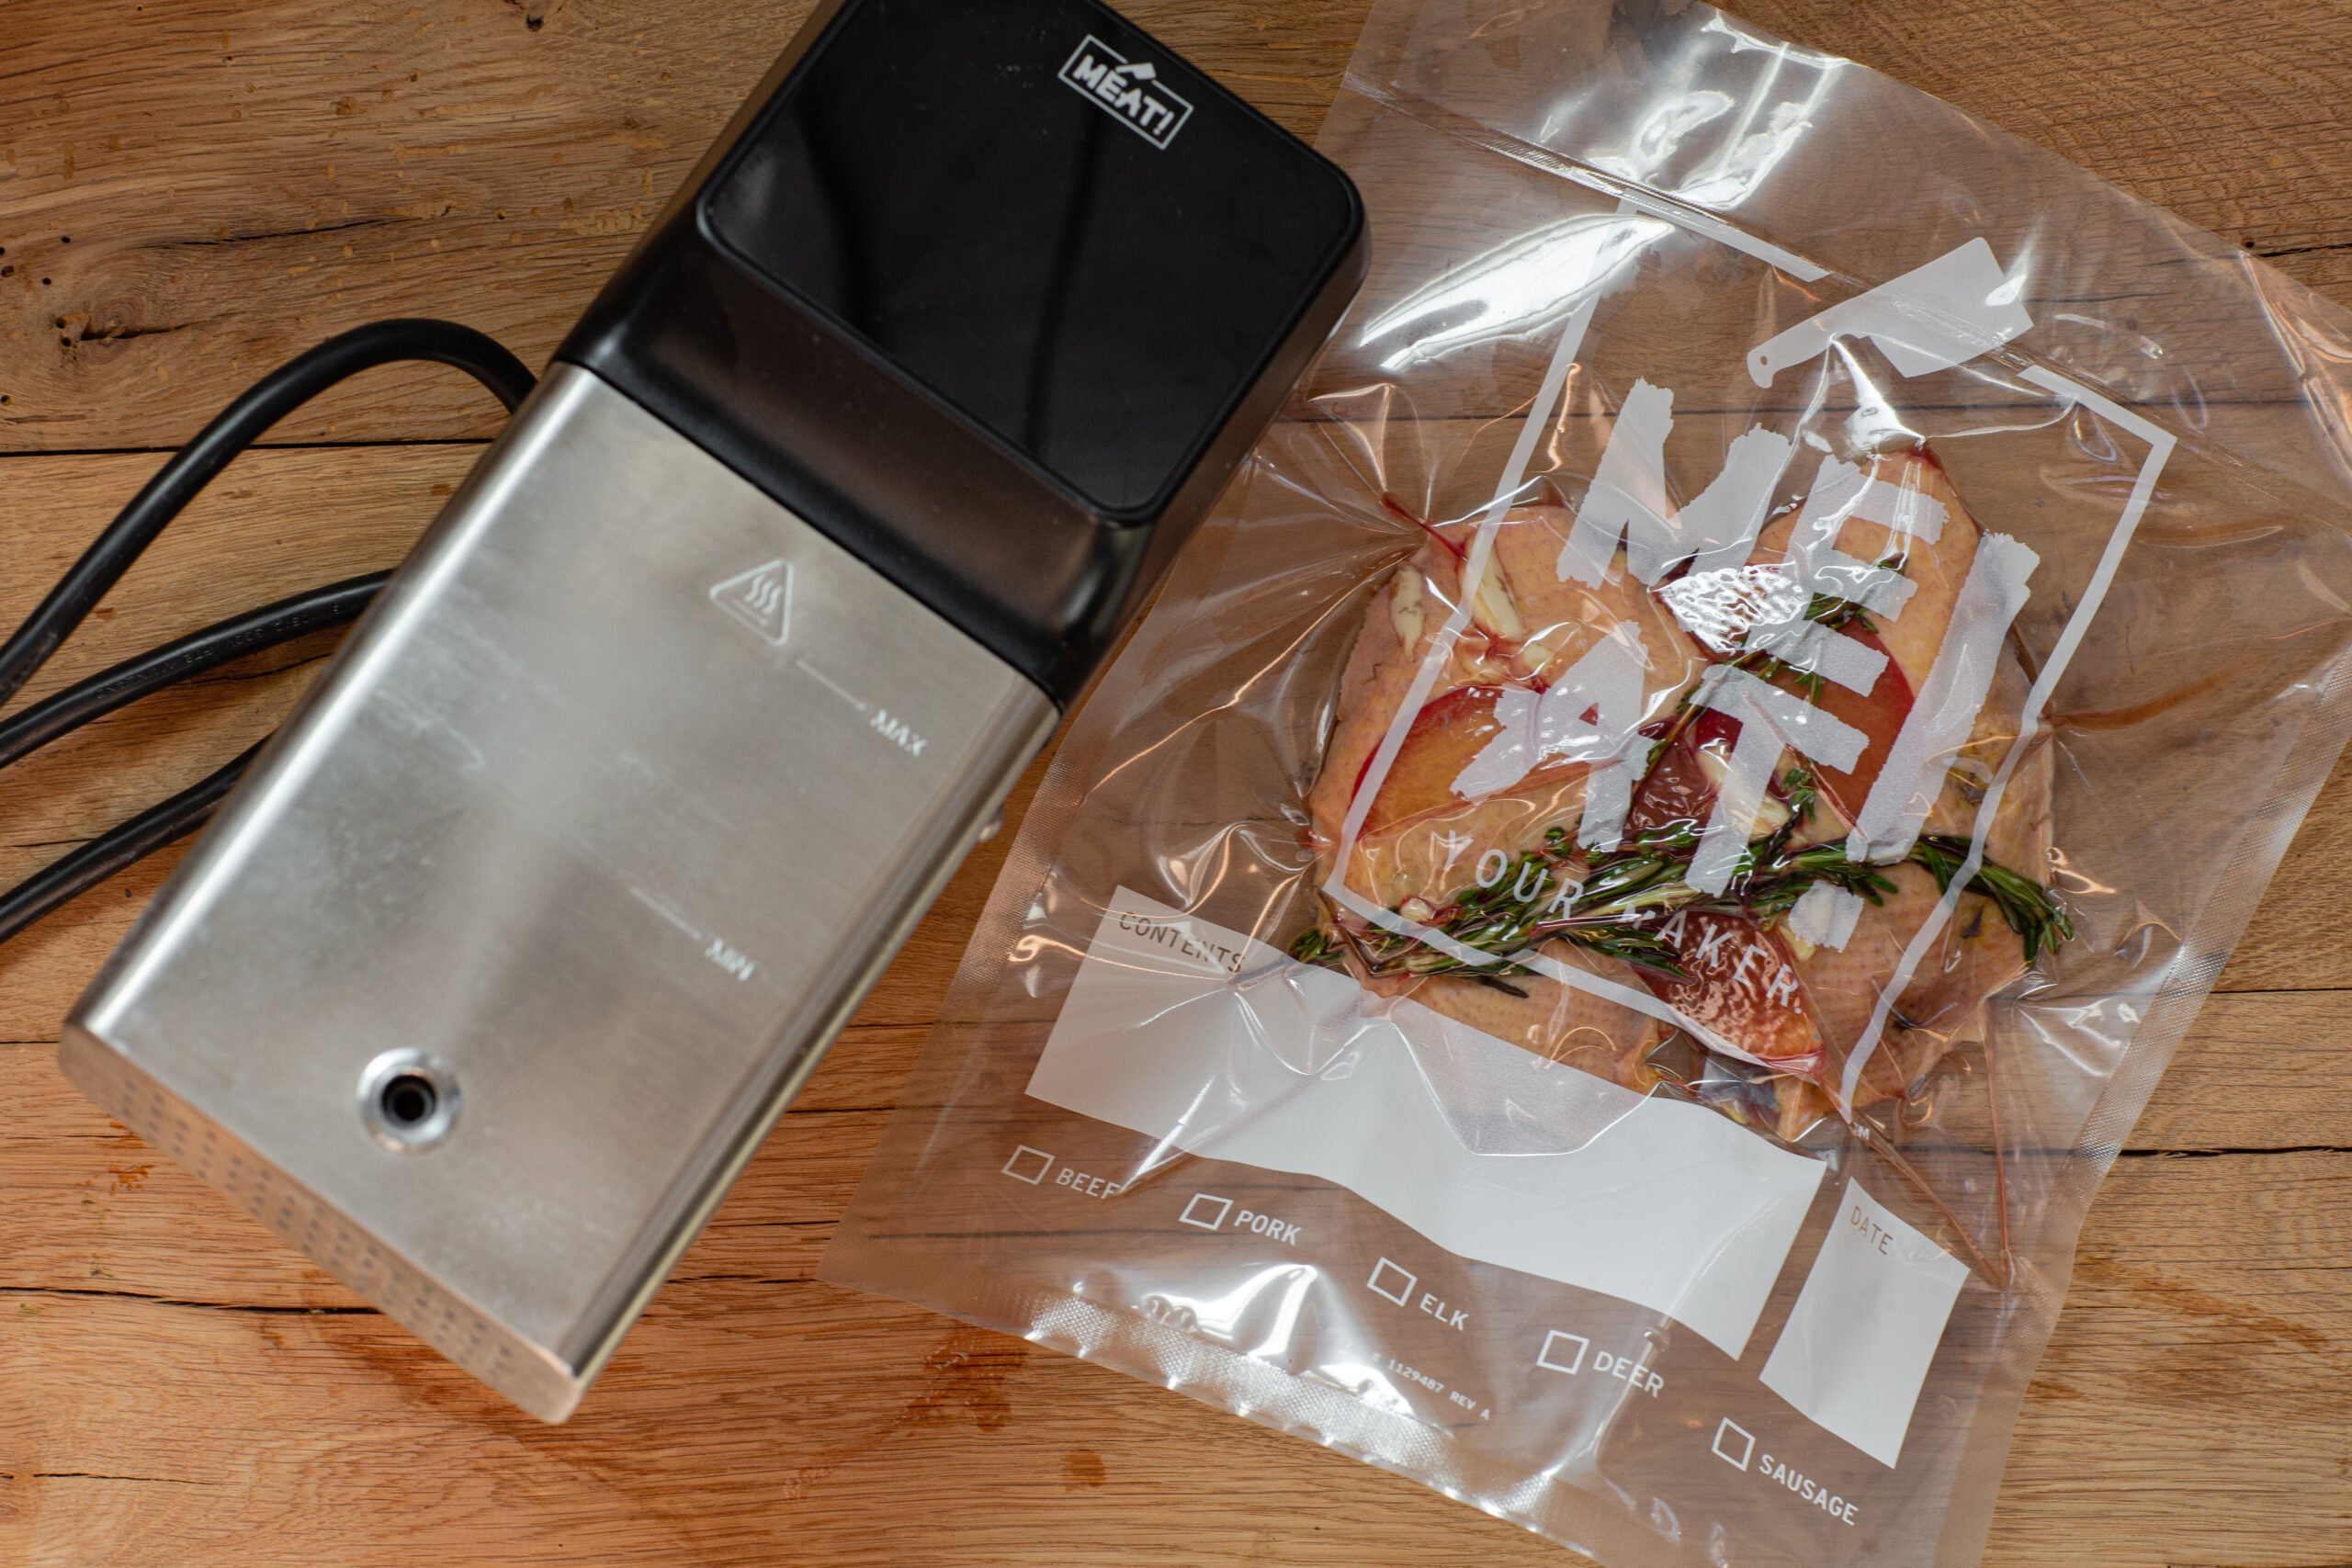 Duck breast sealed in a vacuum-sealed bag in preparation for sous vide cooking